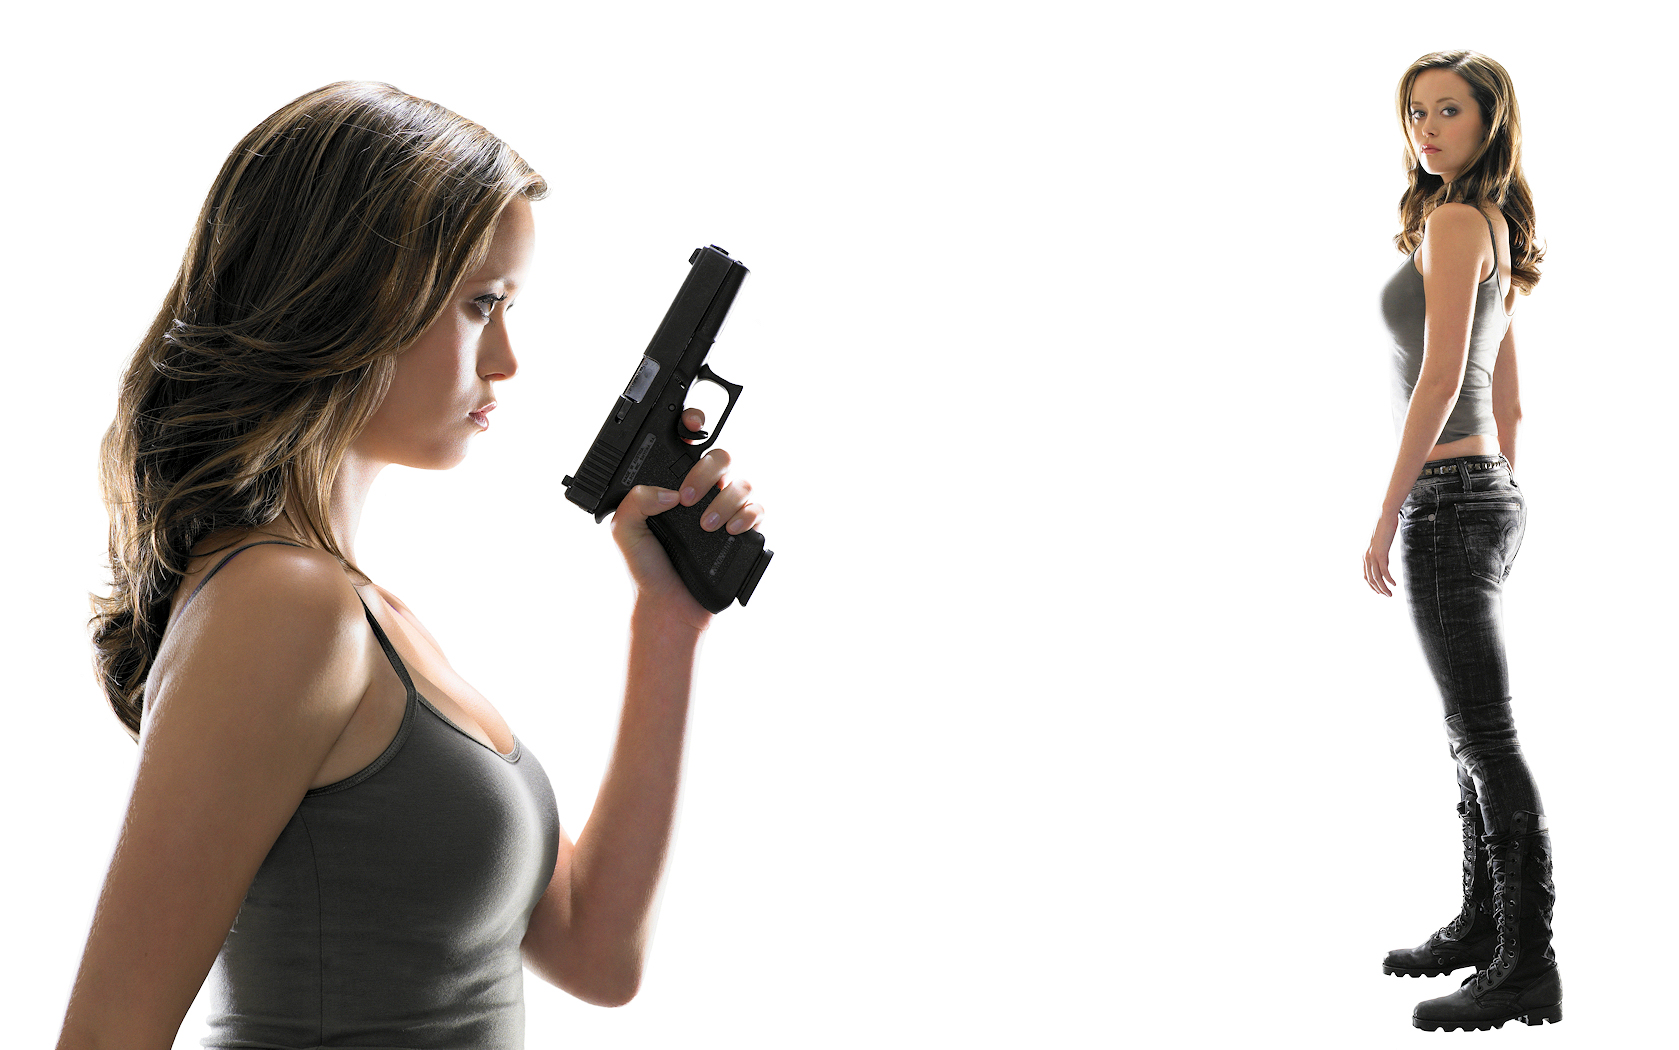 TV Show Terminator: The Sarah Connor Chronicles HD Wallpaper | Background Image